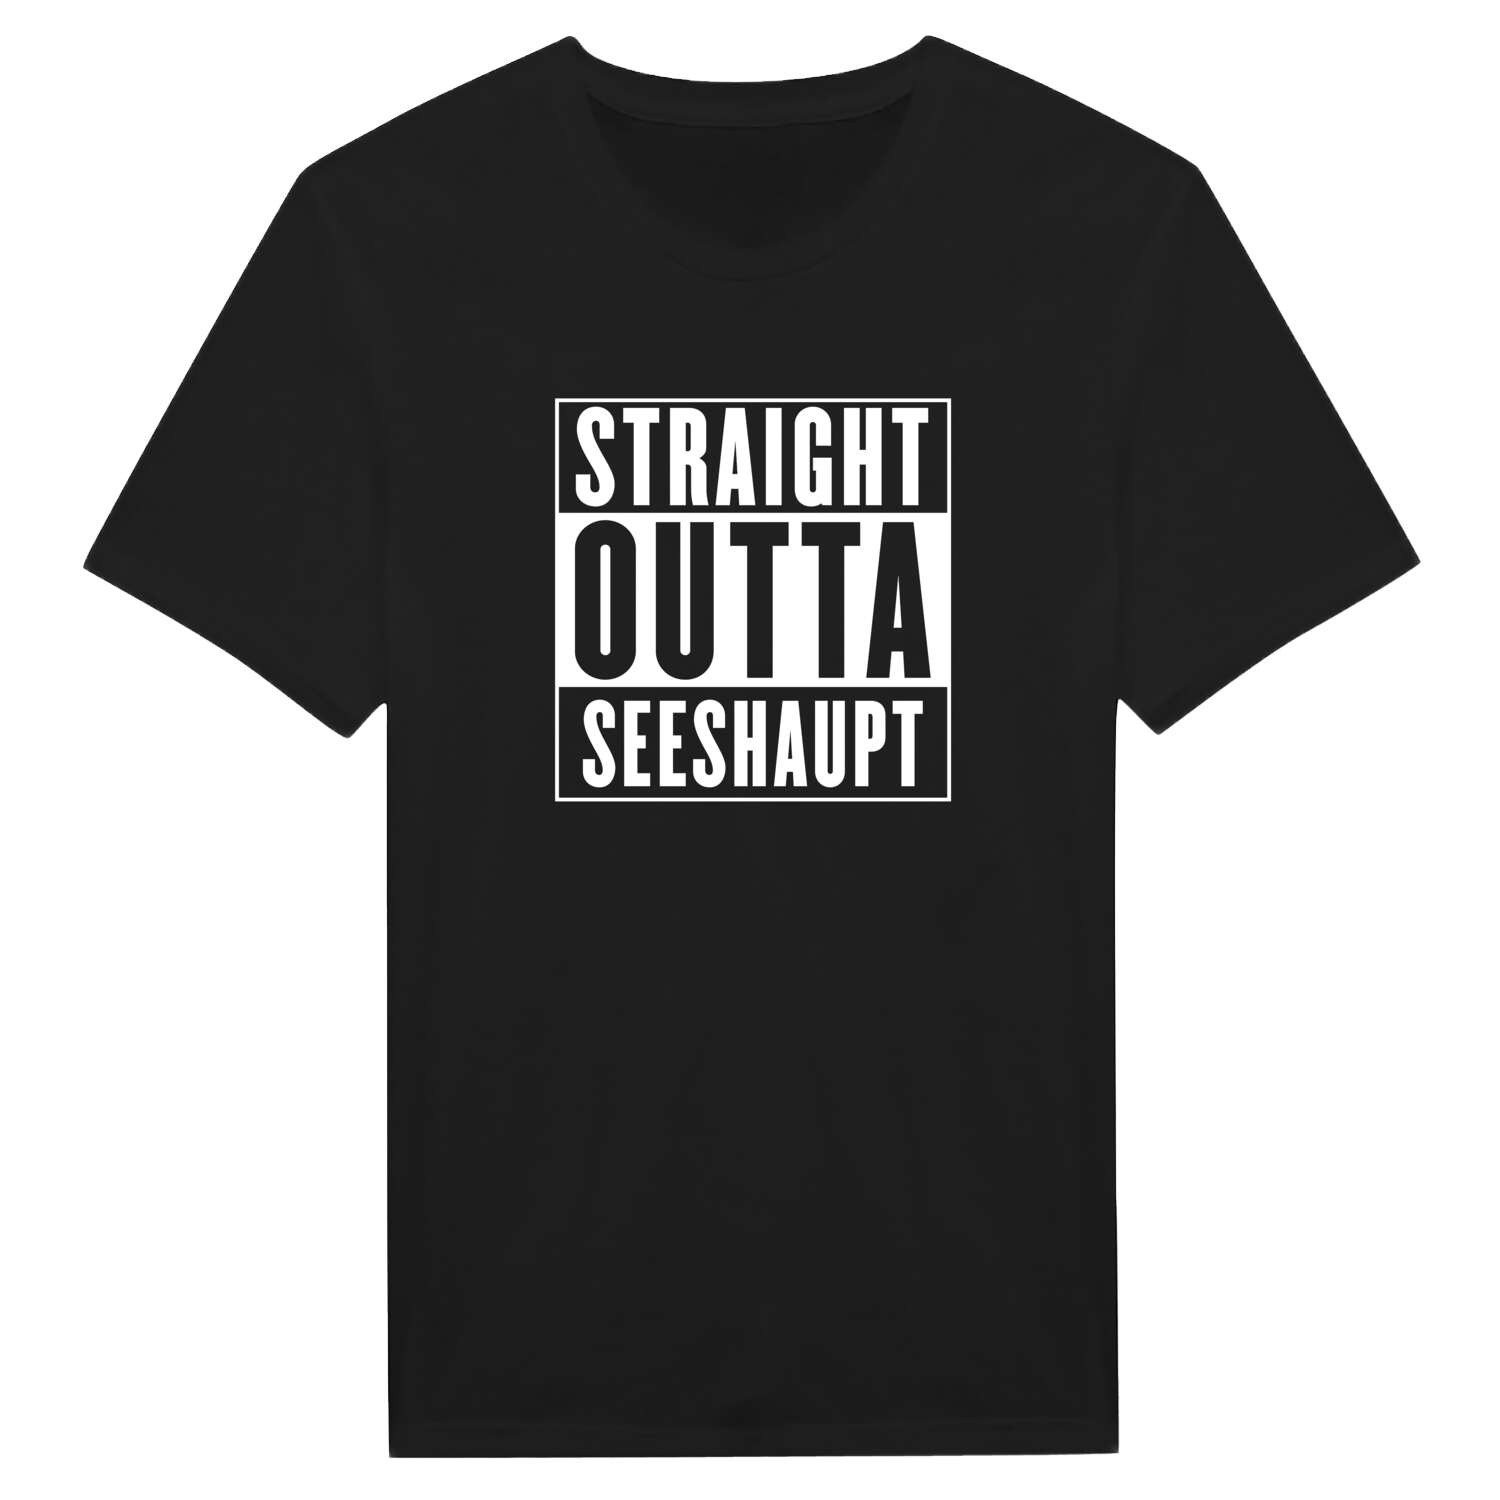 Seeshaupt T-Shirt »Straight Outta«